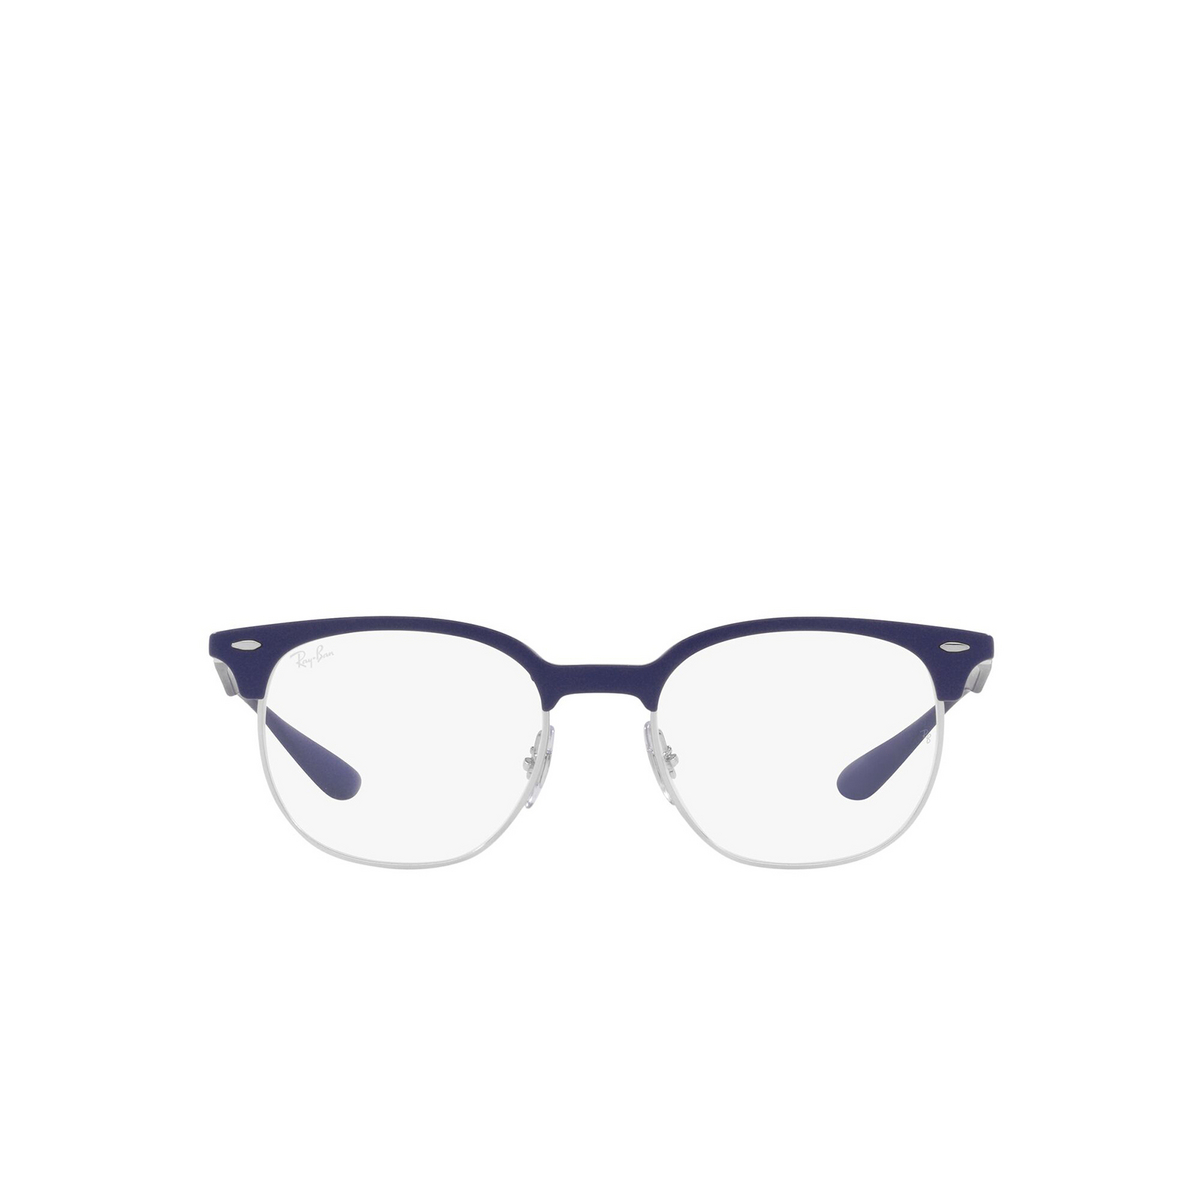 Ray-Ban® Square Eyeglasses: RX7186 color Sand Blue 5207 - front view.